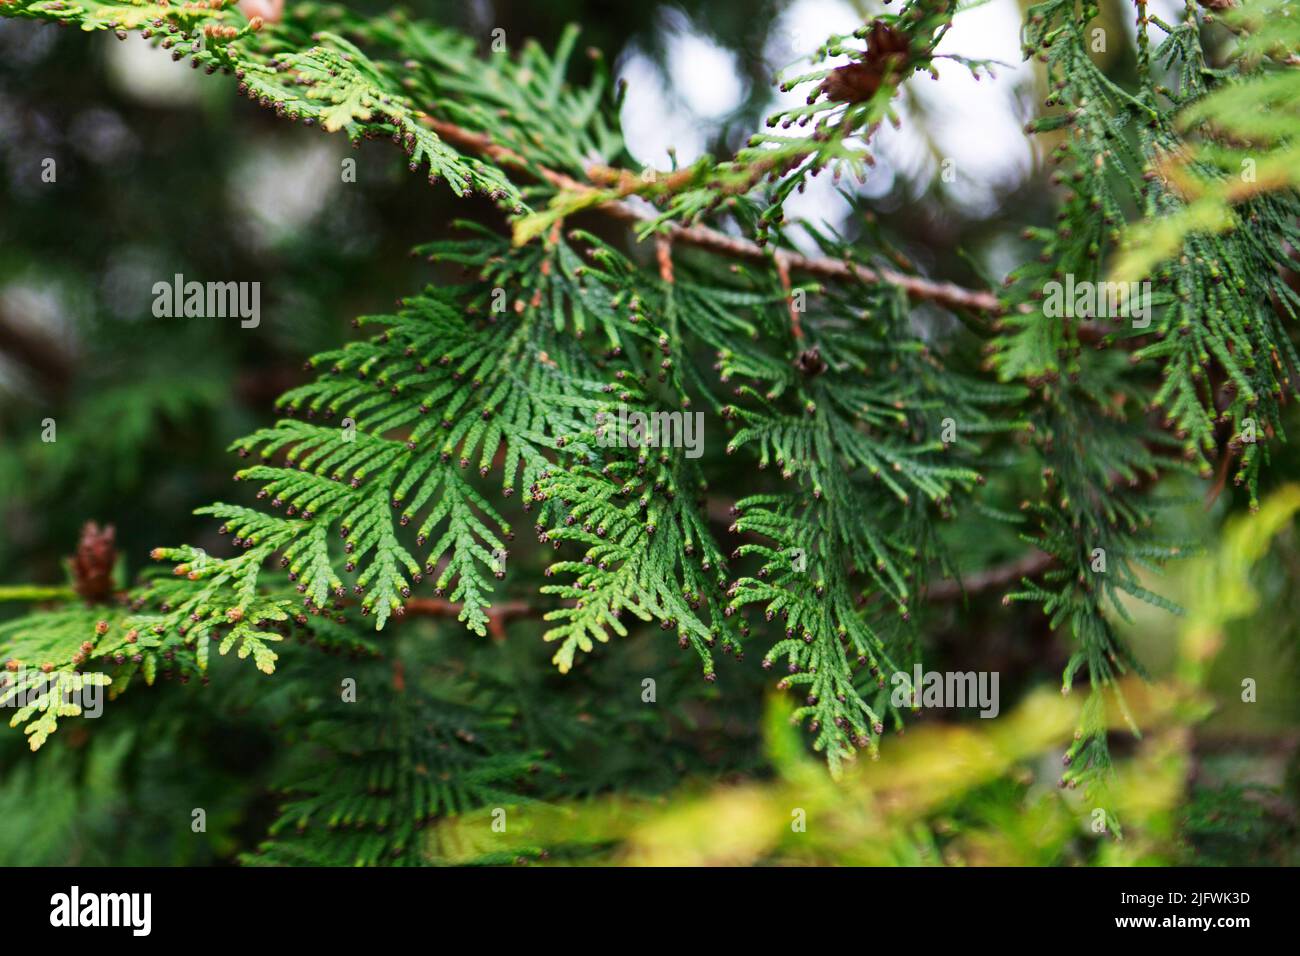 Green thuja branches with flowers and seeds in city park, nature concept. Stock Photo